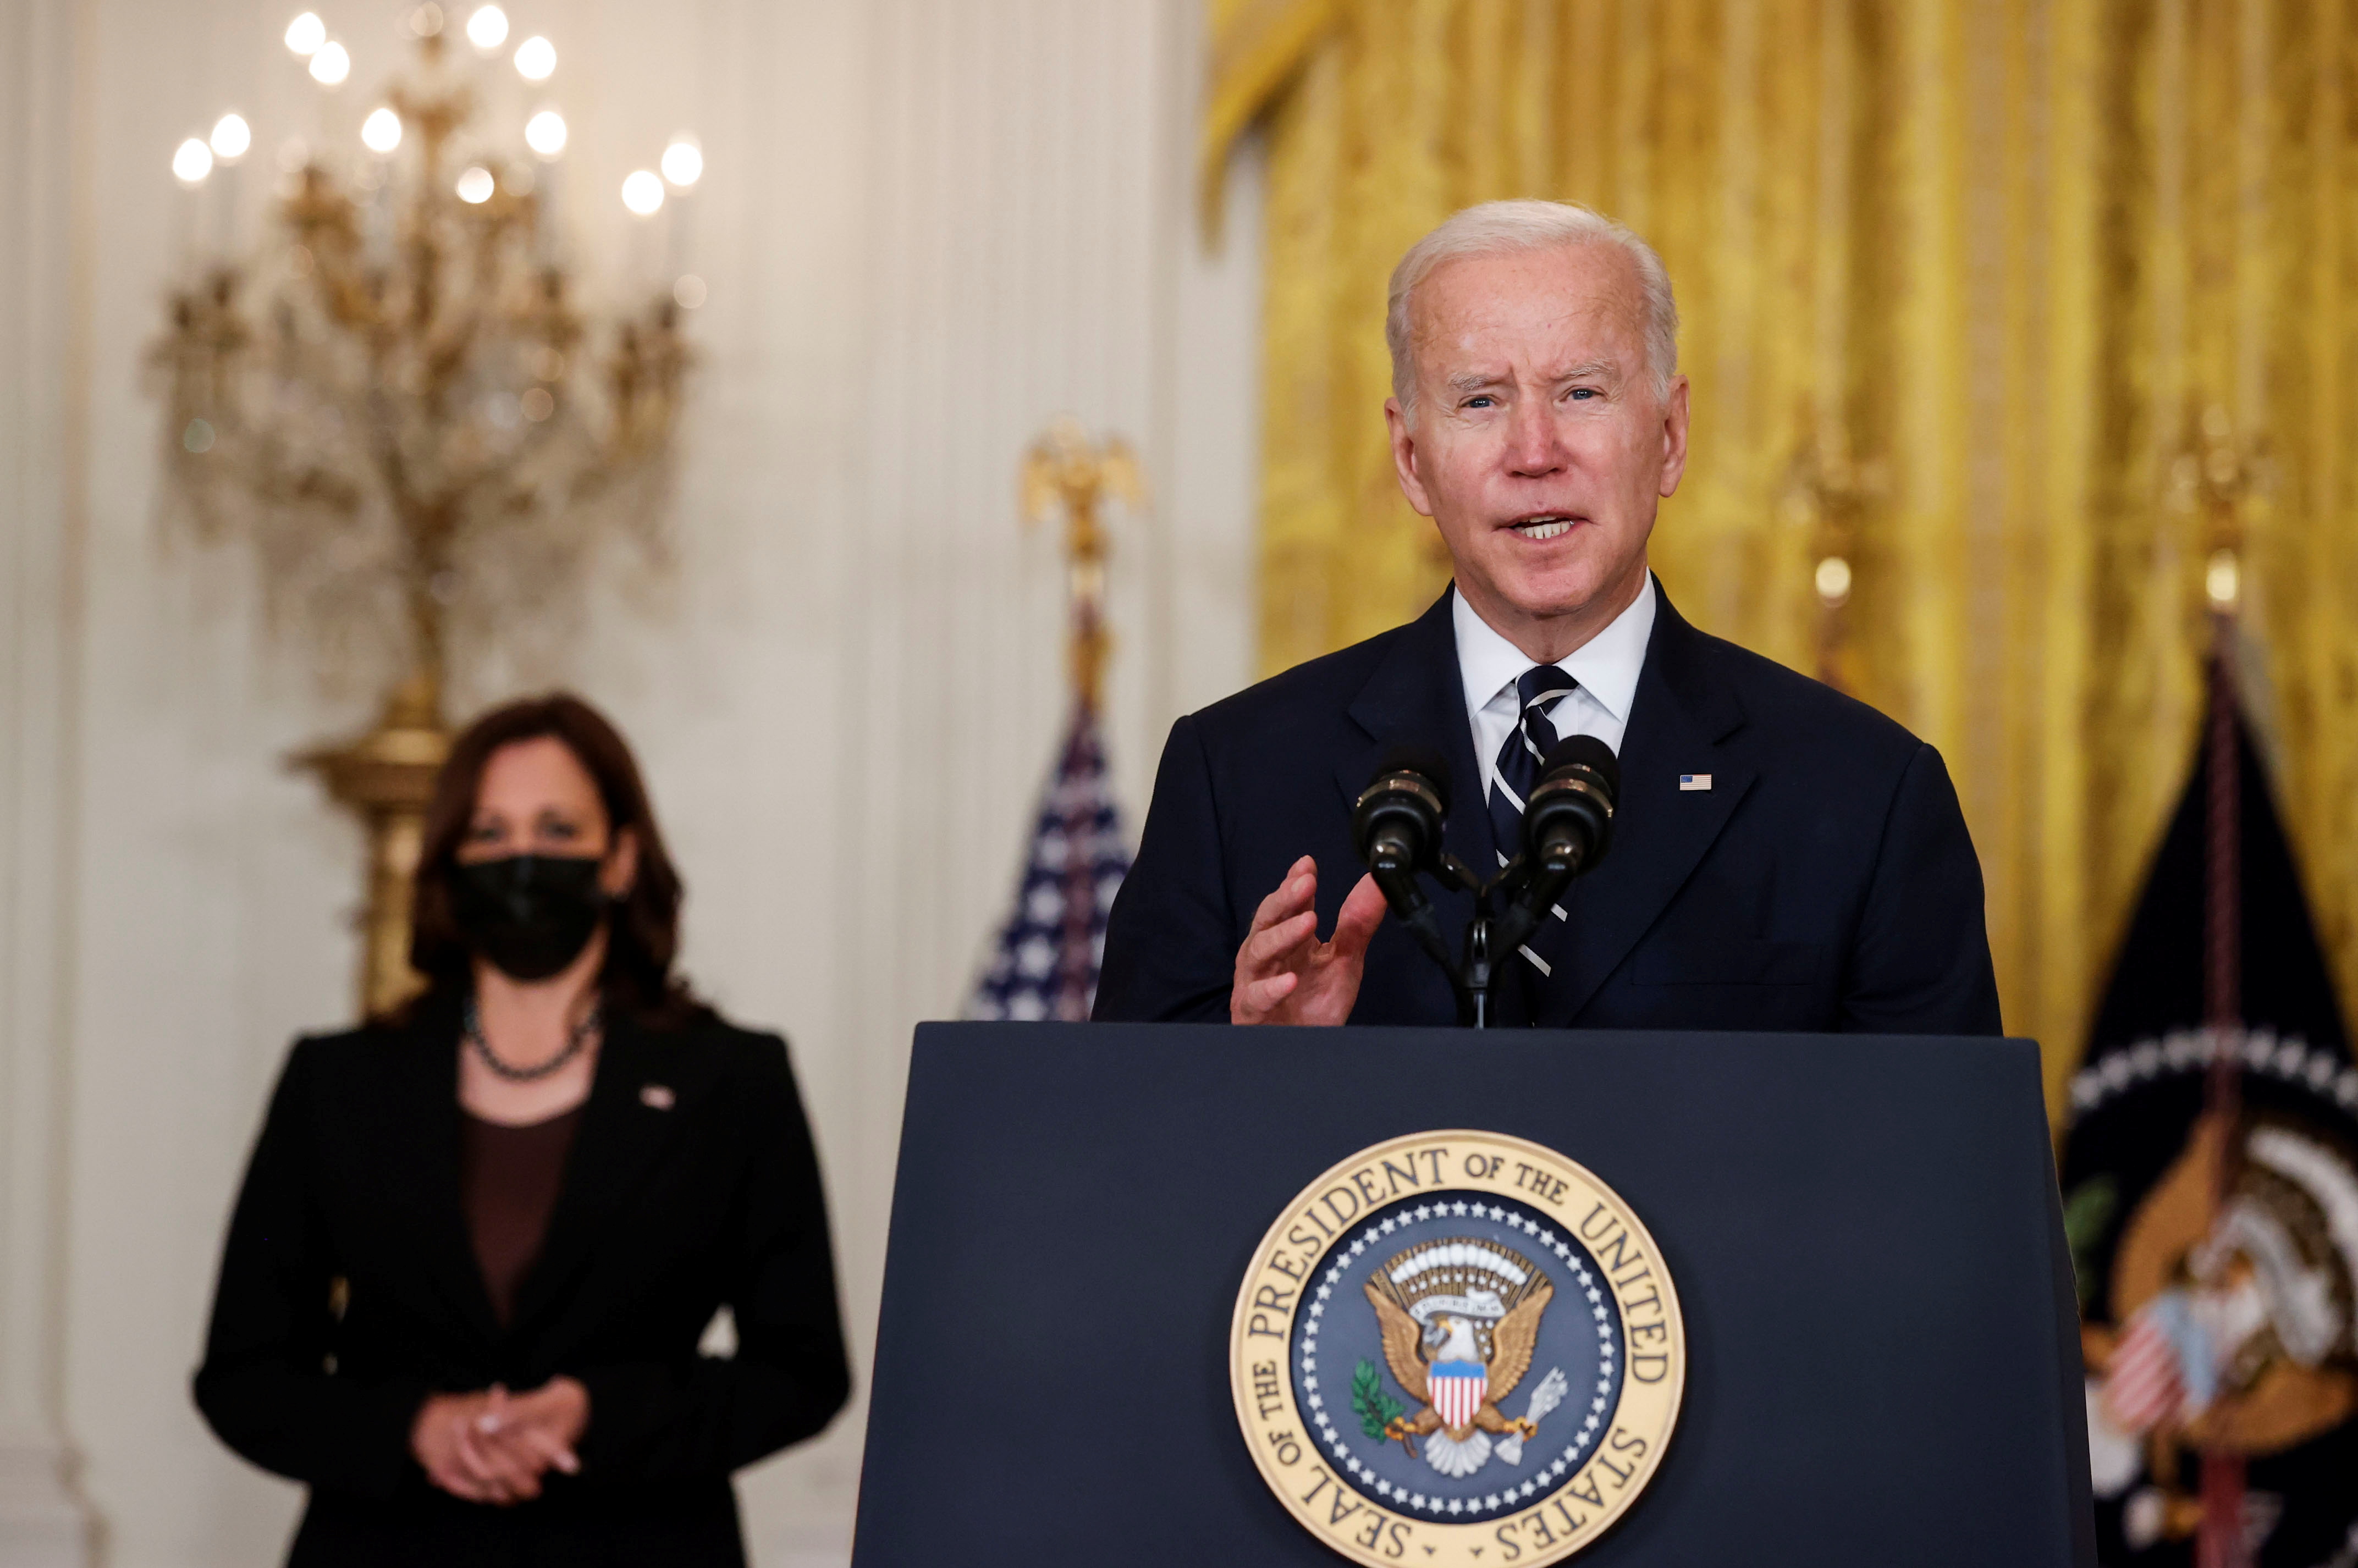 U.S. President Joe Biden delivers remarks about his Build Back Better agenda and the bipartisan infrastructure deal as Vice President Kamala Harris stands by in the East Room of the White House in Washington, U.S., October 28, 2021. REUTERS/Jonathan Ernst